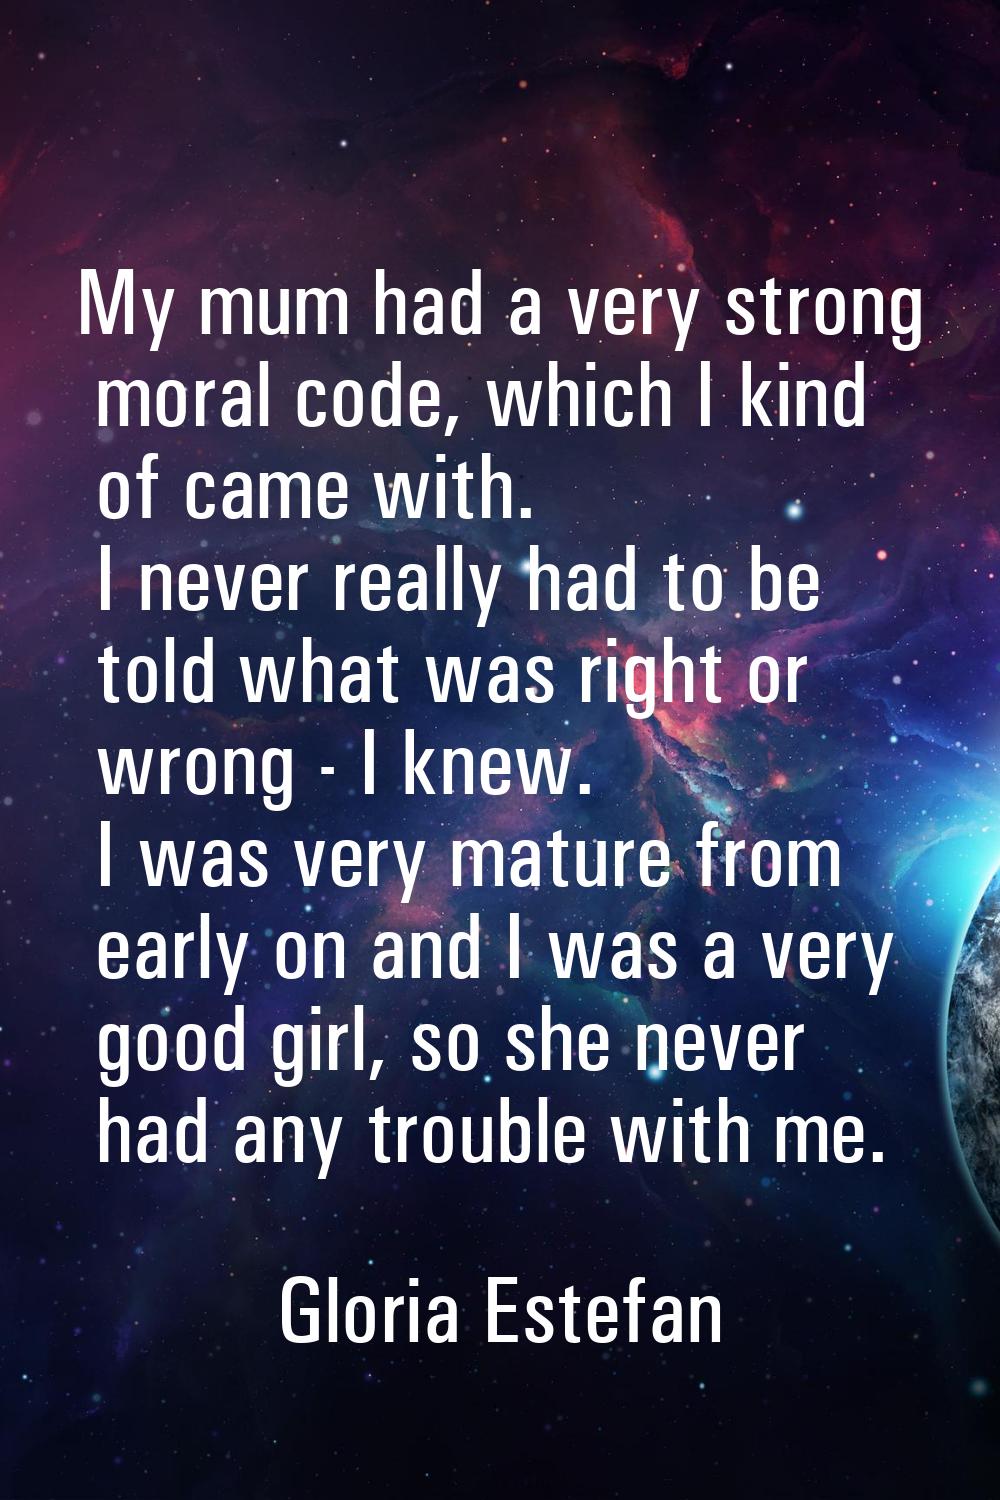 My mum had a very strong moral code, which I kind of came with. I never really had to be told what 